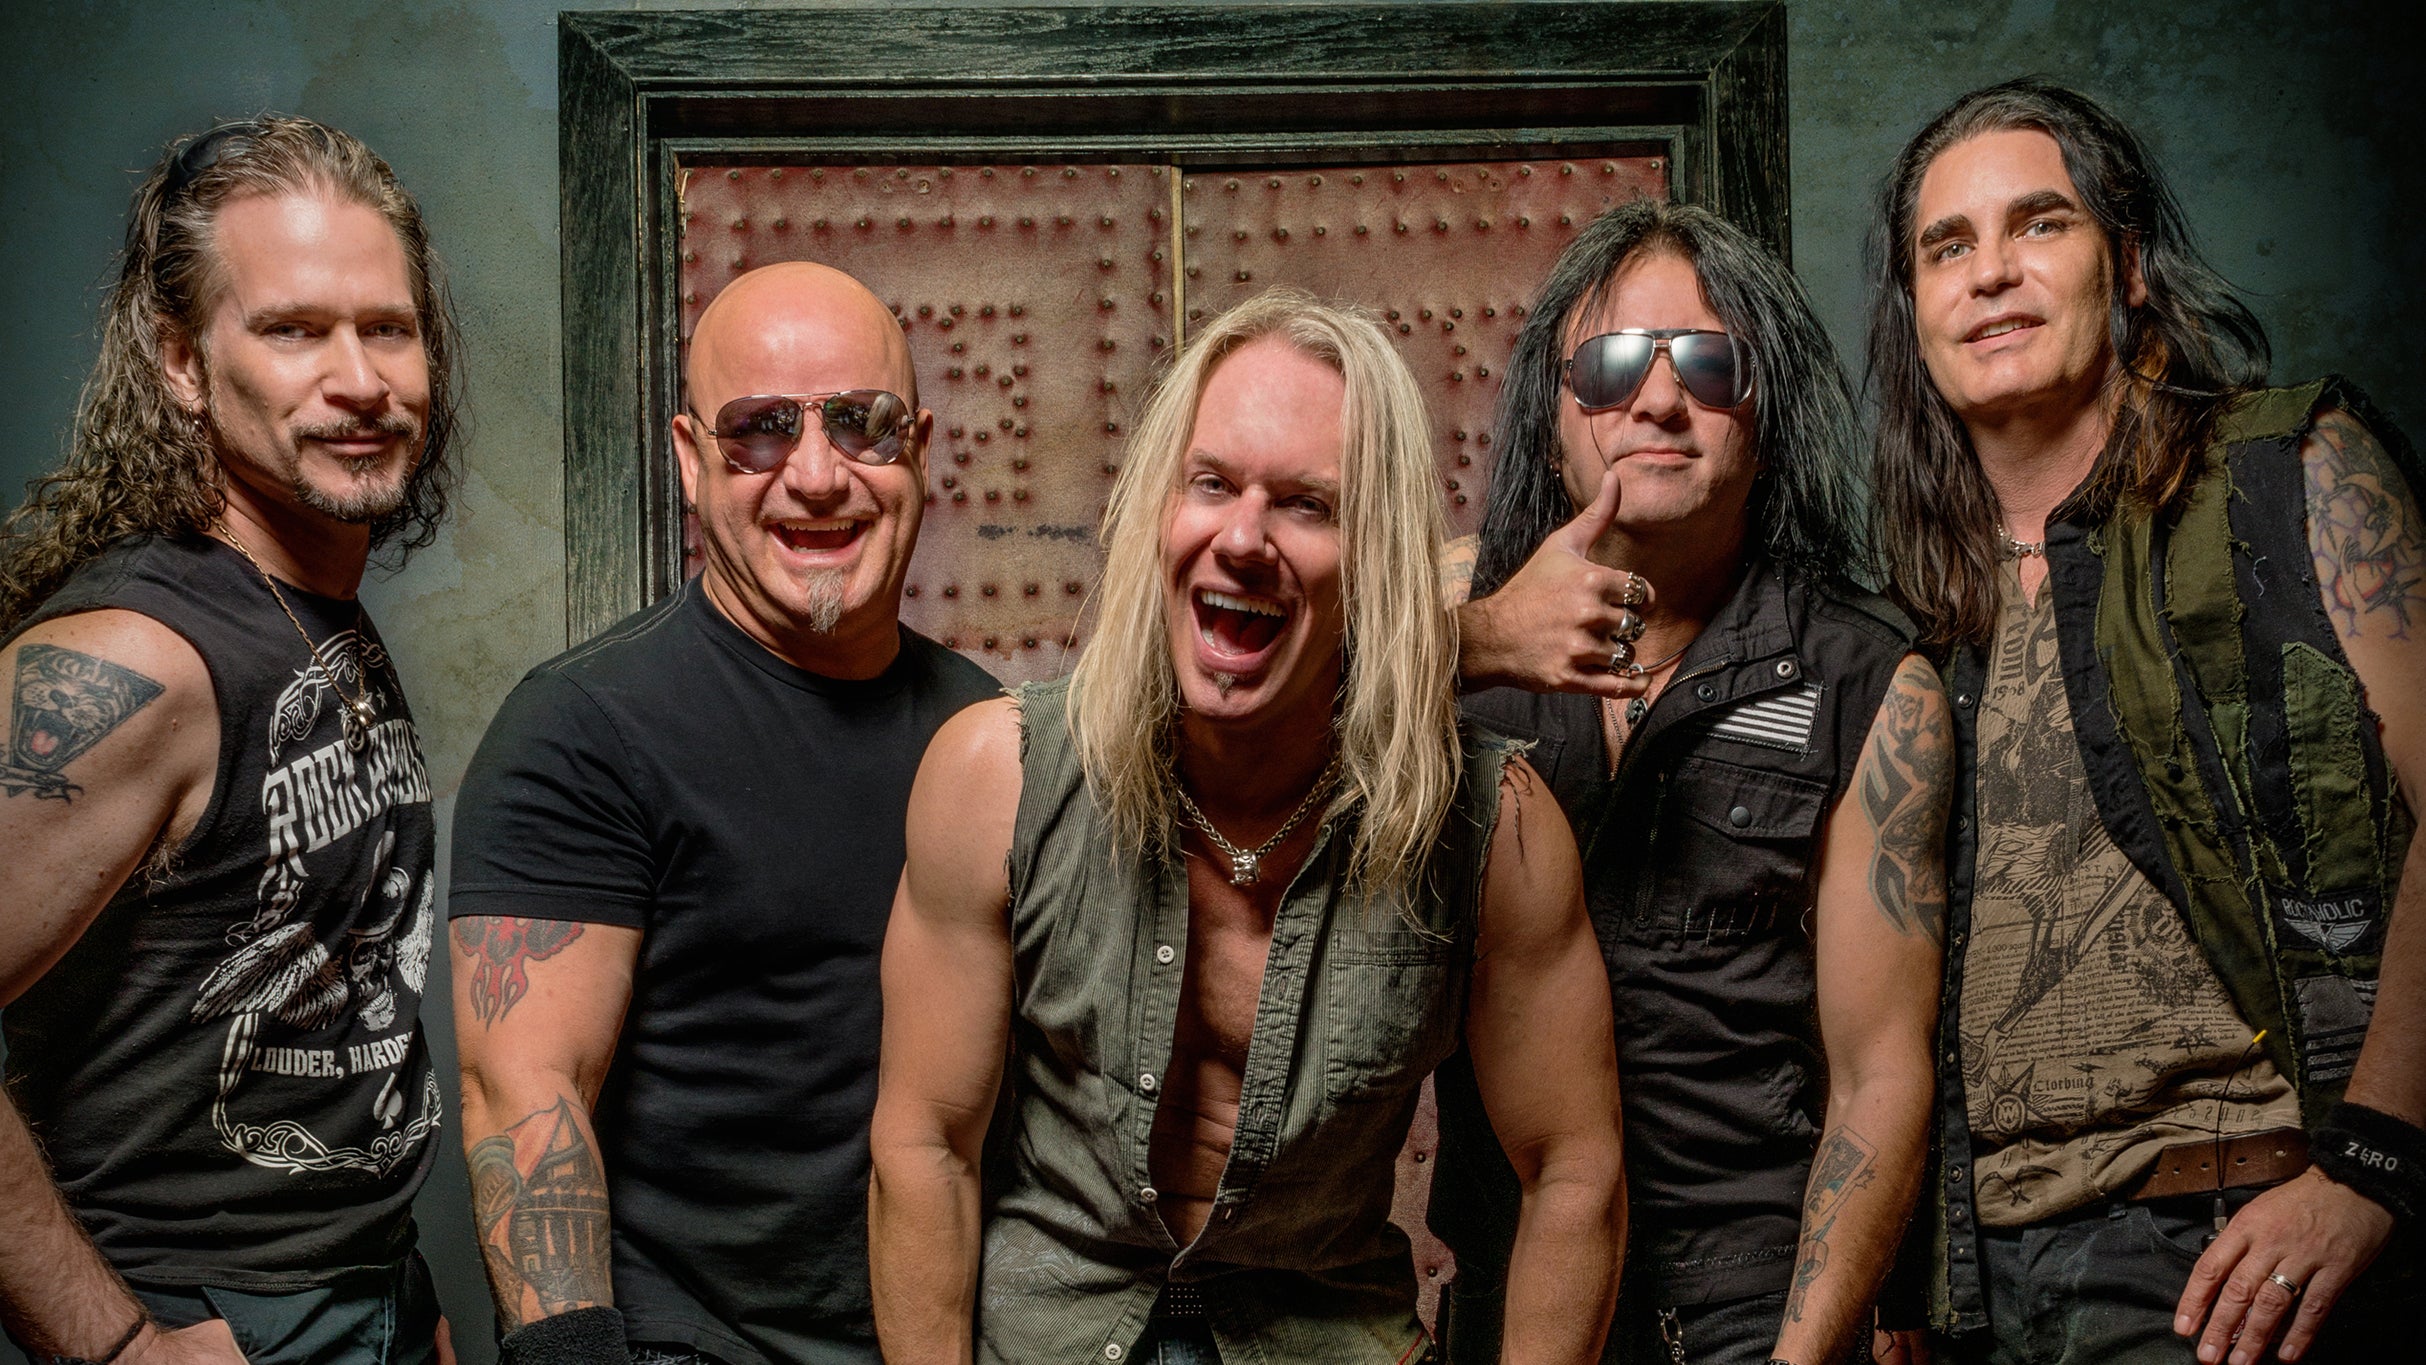 Warrant presale password for early tickets in Sylvania